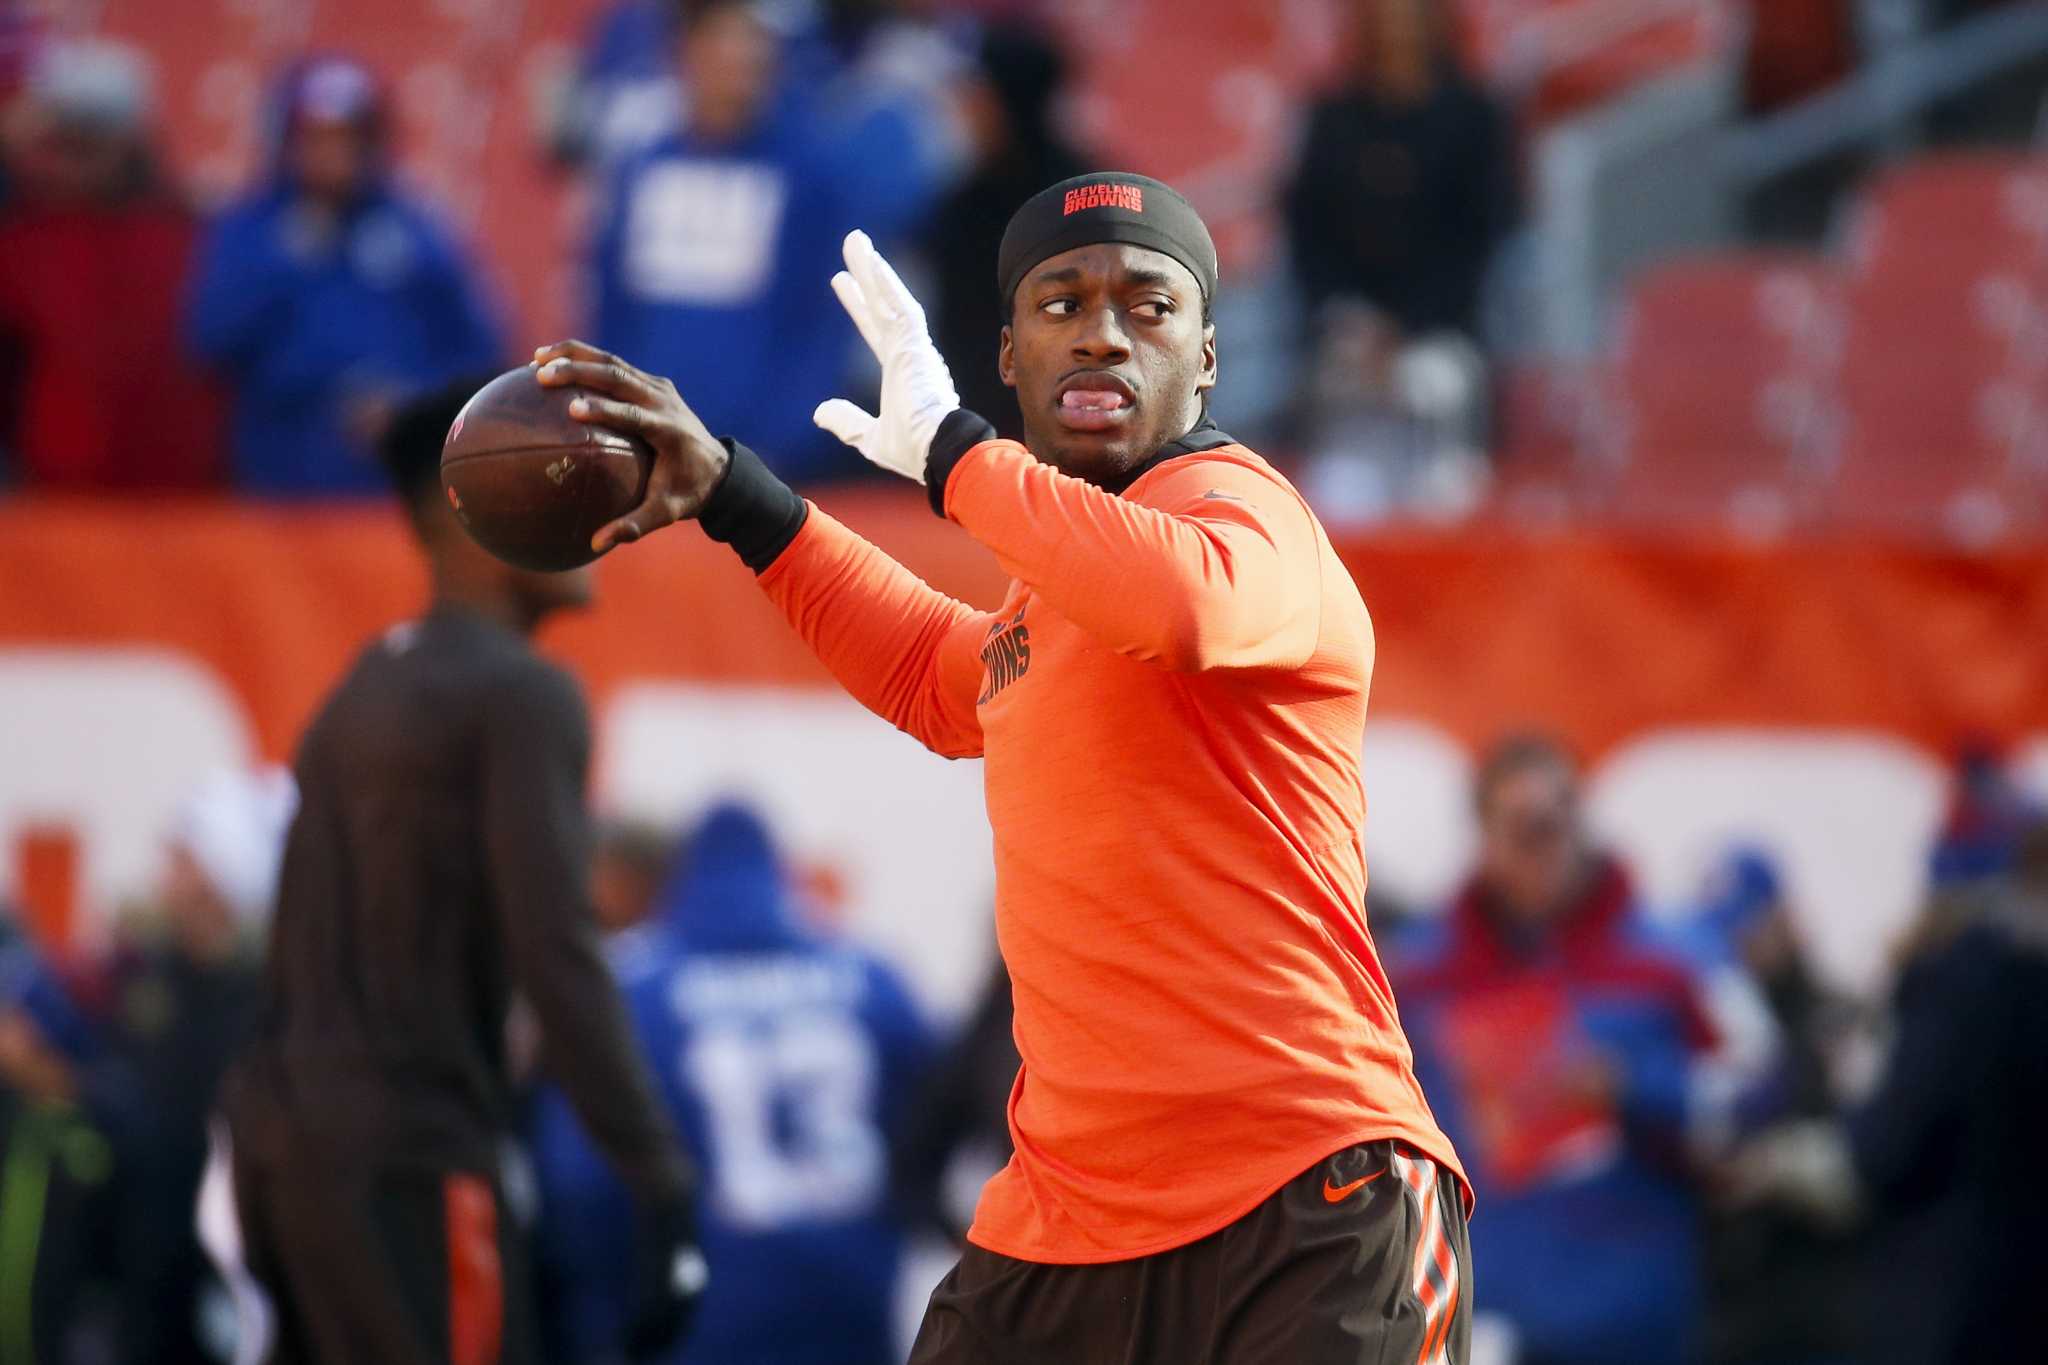 Browns' Robert Griffin III has cash stolen from car in players' lot